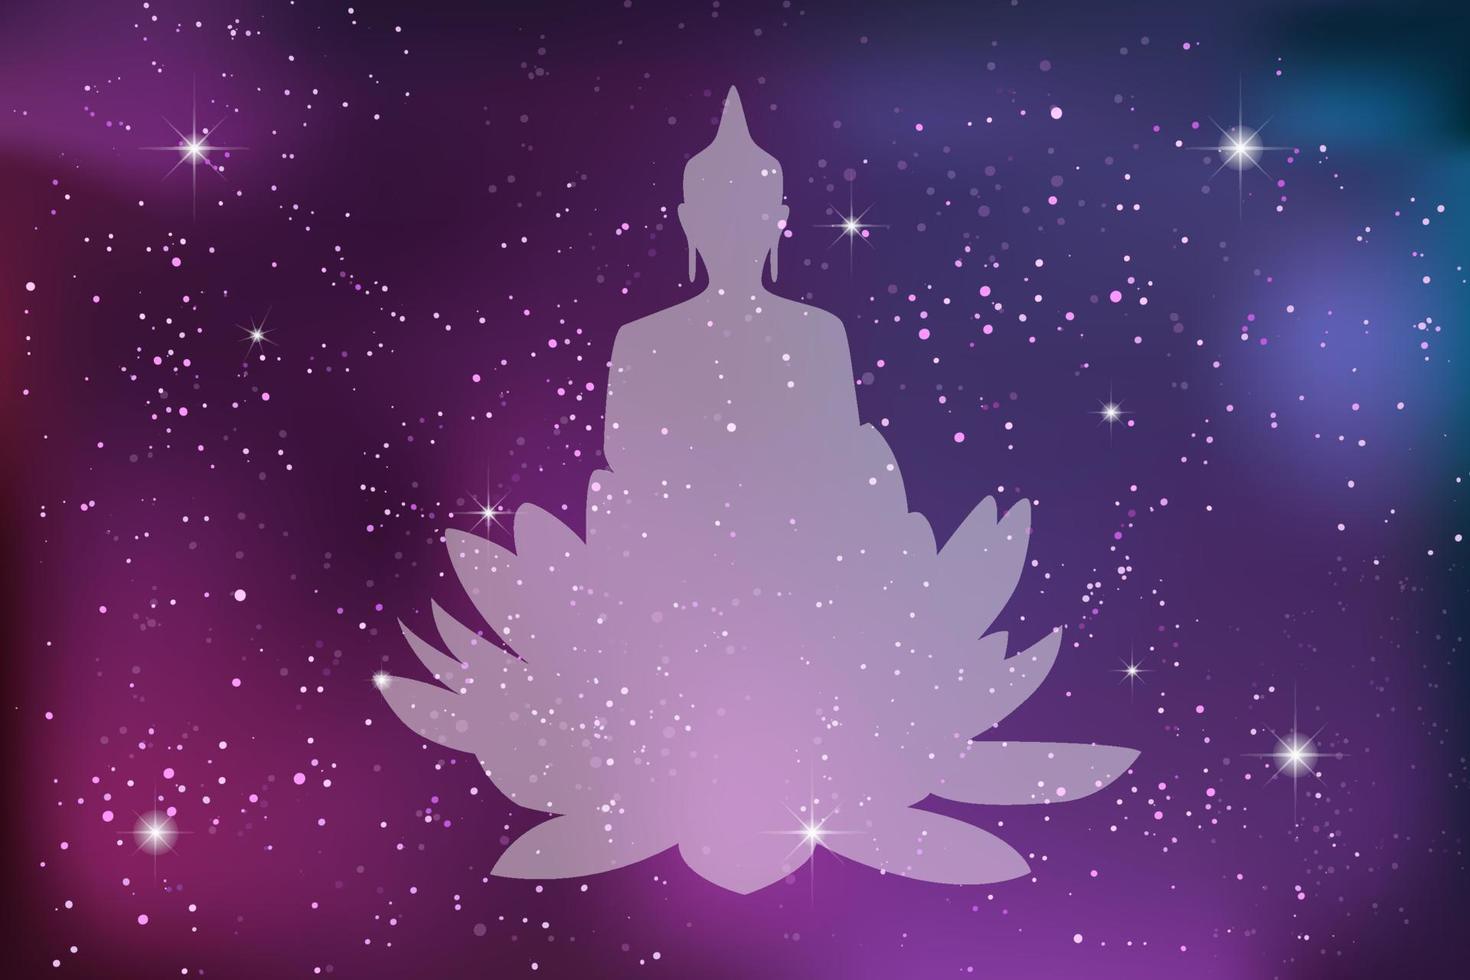 Happy Vesak Day Buddha silhouette on a lotus flower against a background of starry cosmos. Vector illustration. Poster, banner and print design.